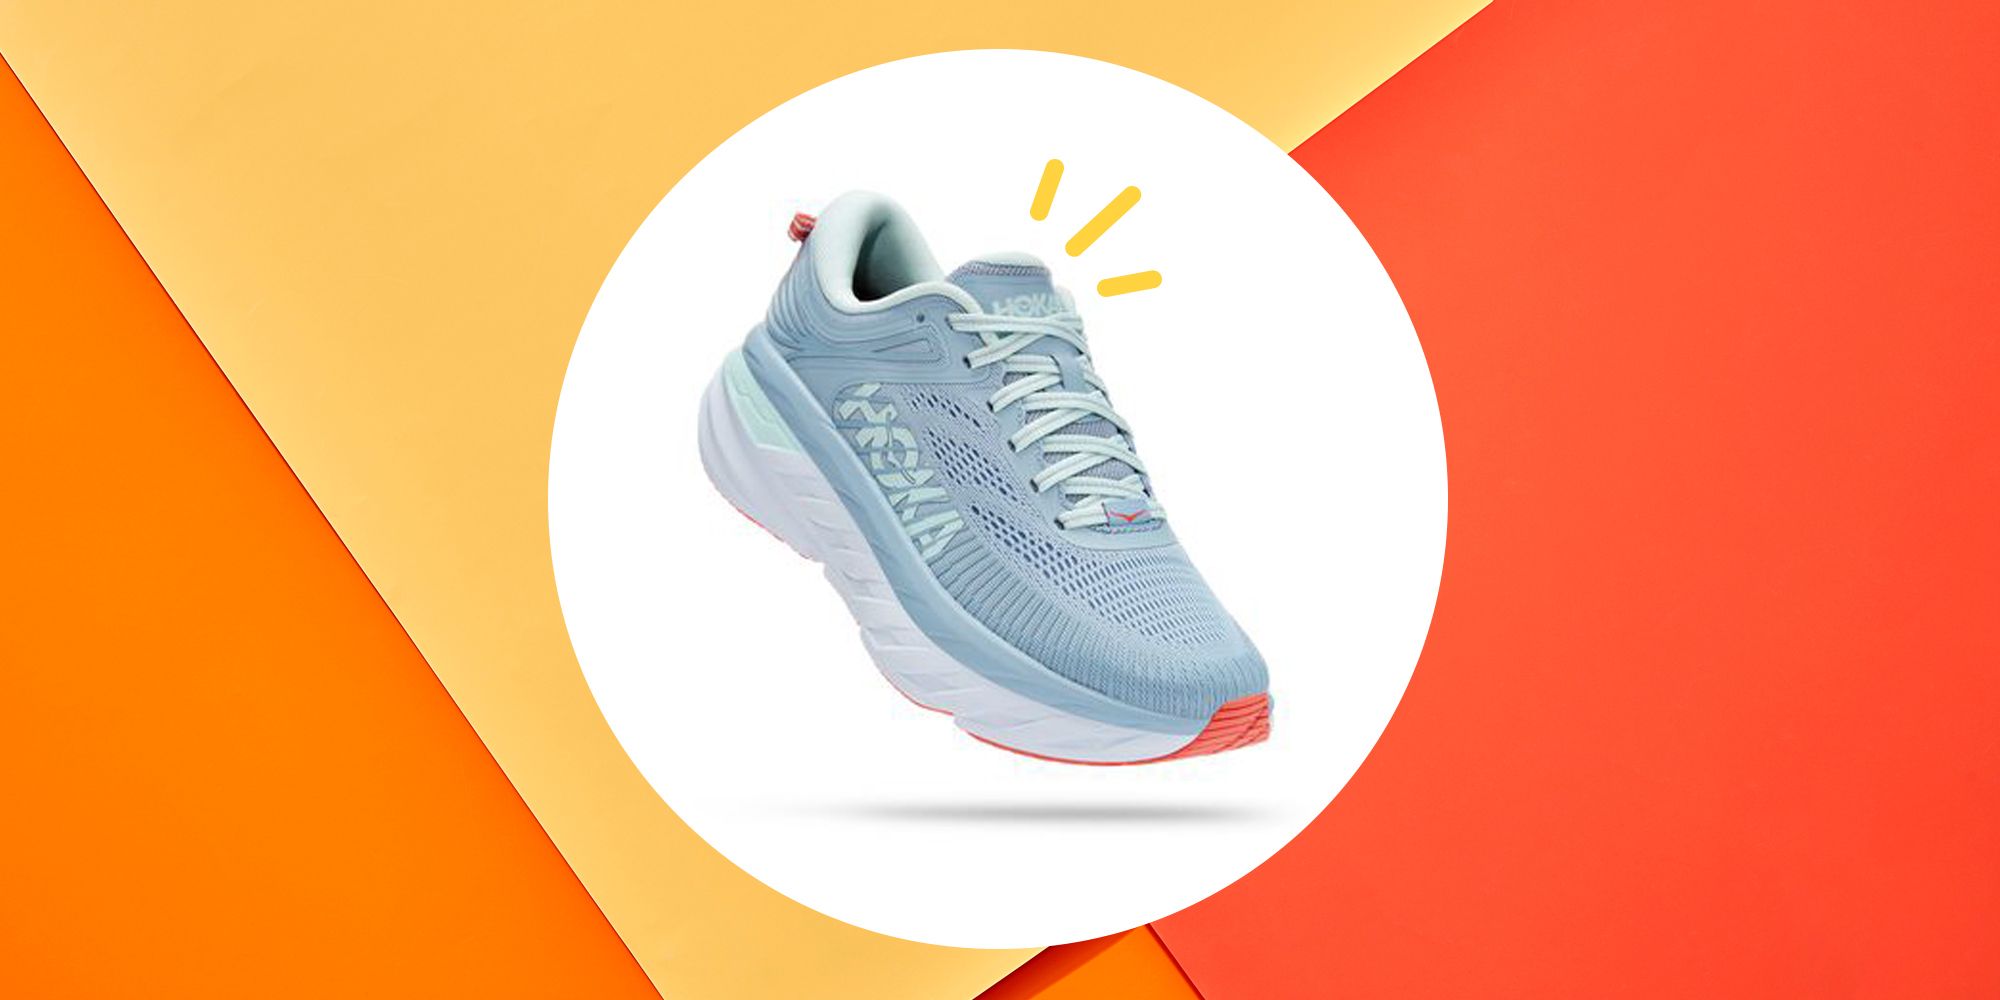 I Tried Lululemon's Blissfeel Running Shoes. Here's My Review - Chatelaine